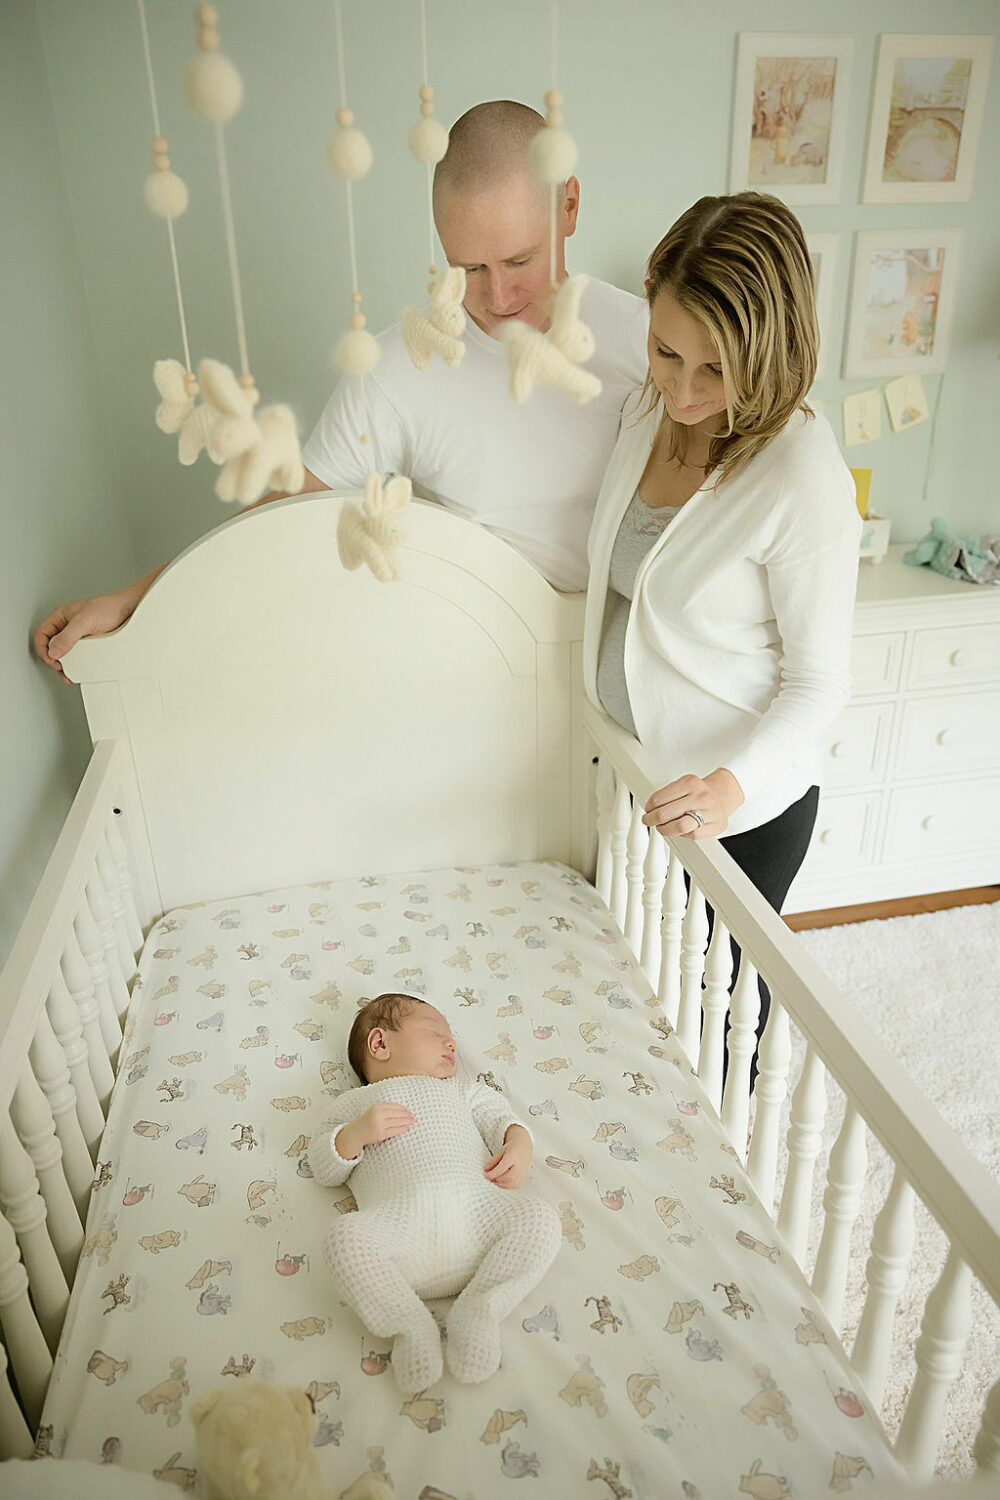 New parents looking down at Sleepy infant boy in his crib posing in nursery for their bright, in-home newborn session, taken in Monmouth county, New Jersey.